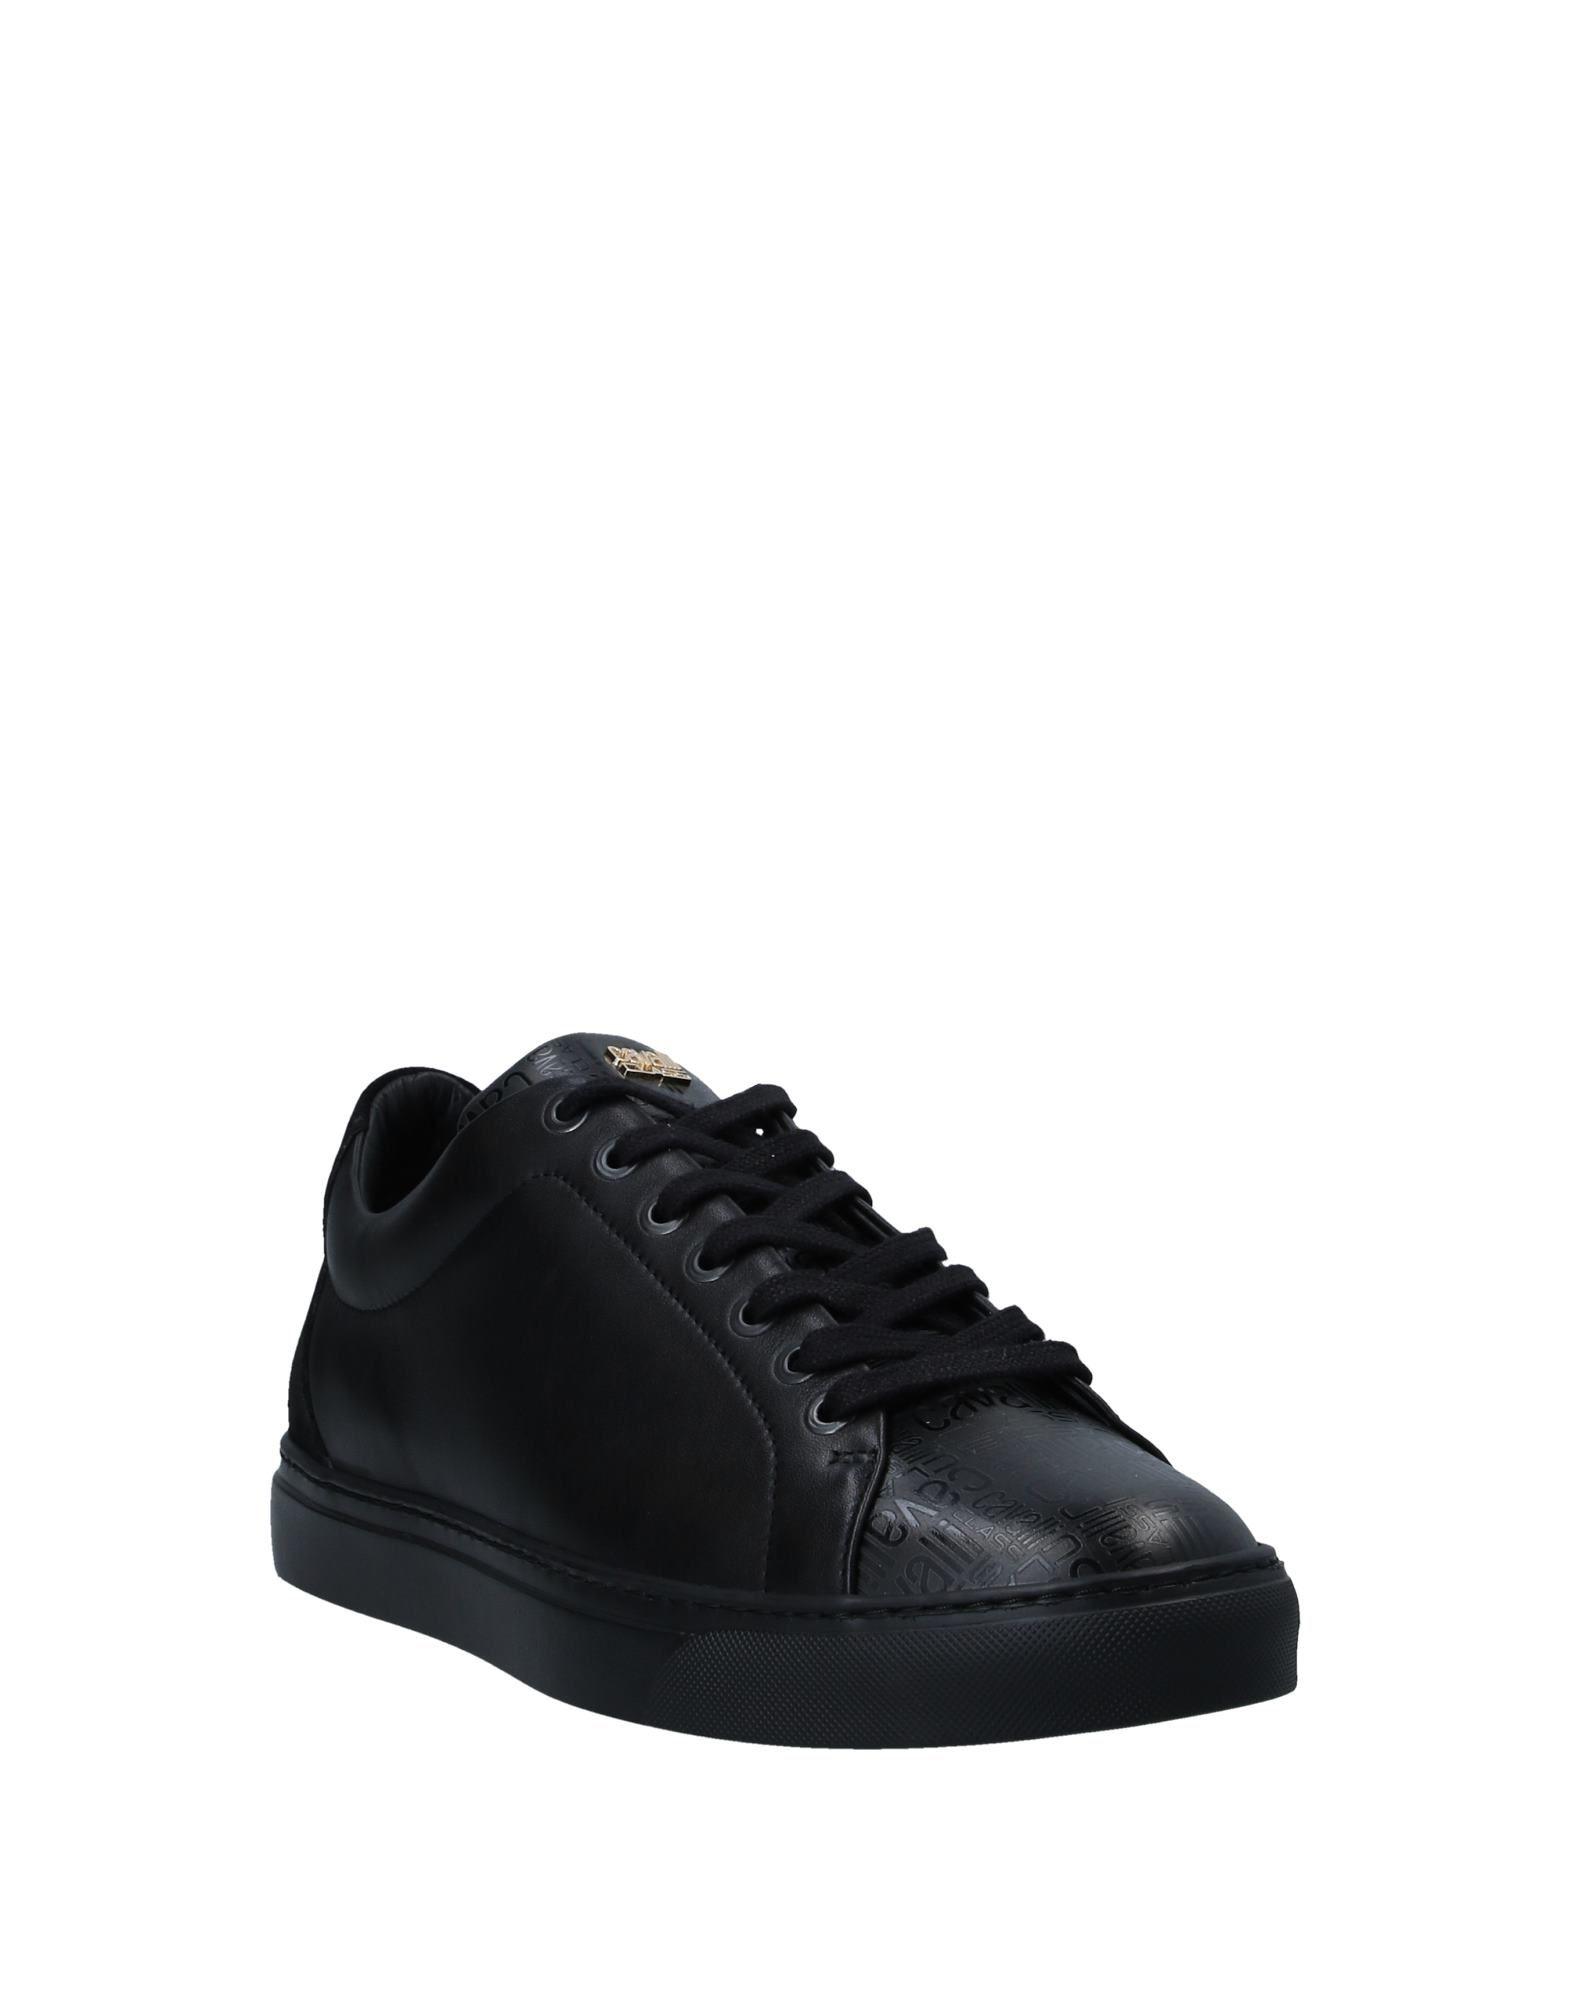 Class Roberto Cavalli Leather Low-tops & Sneakers in Black for Men - Lyst